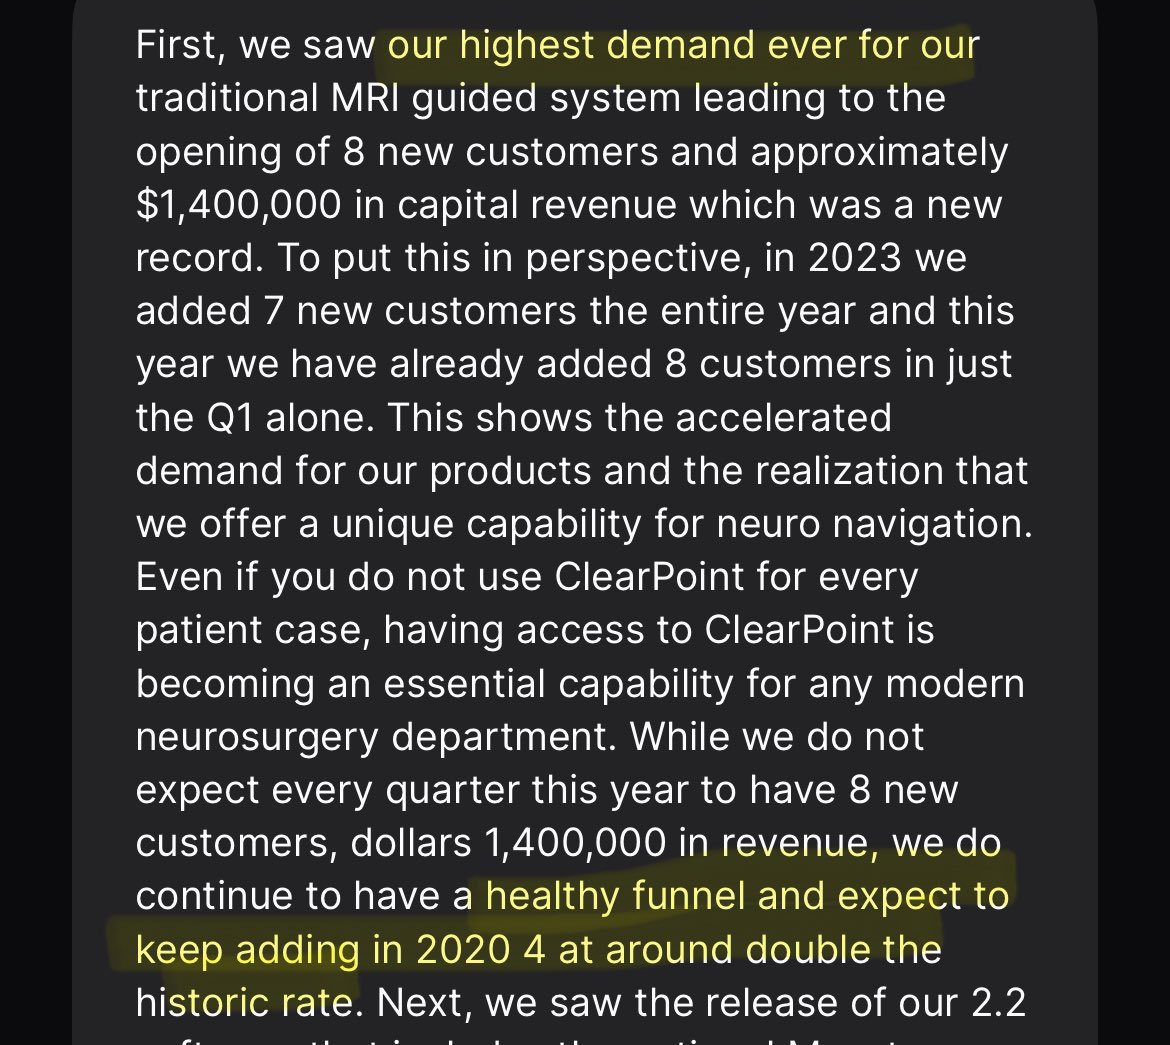 Move to the OR hitting the ground running $CLPT

“Highest demand ever” for trad MRI

Placement funnel: “Adding at double the historic rate”